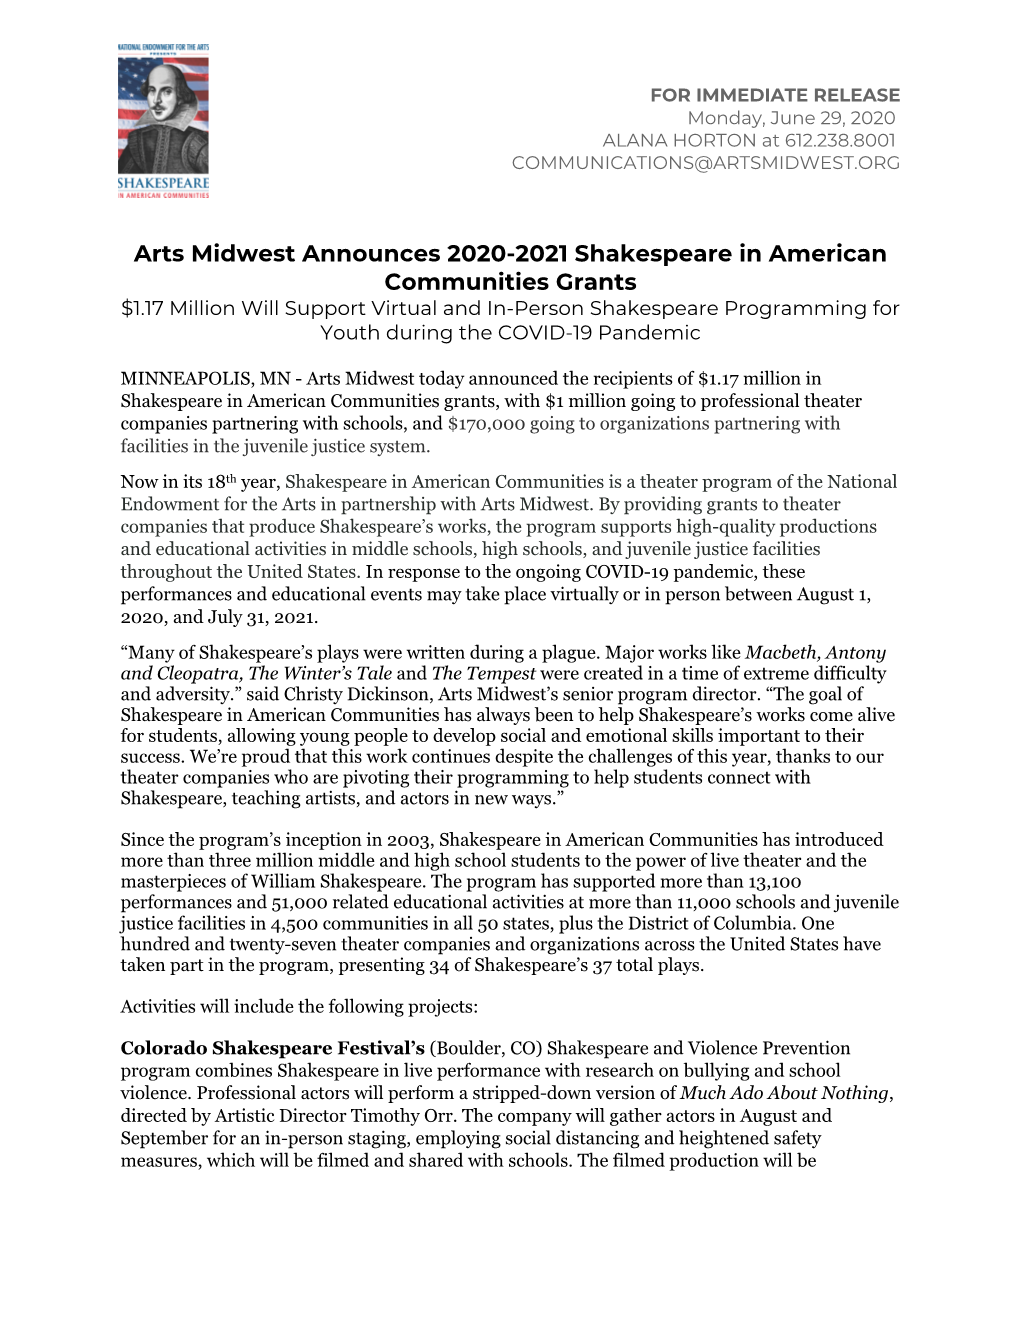 Arts Midwest Announces 2020-2021 Shakespeare in American